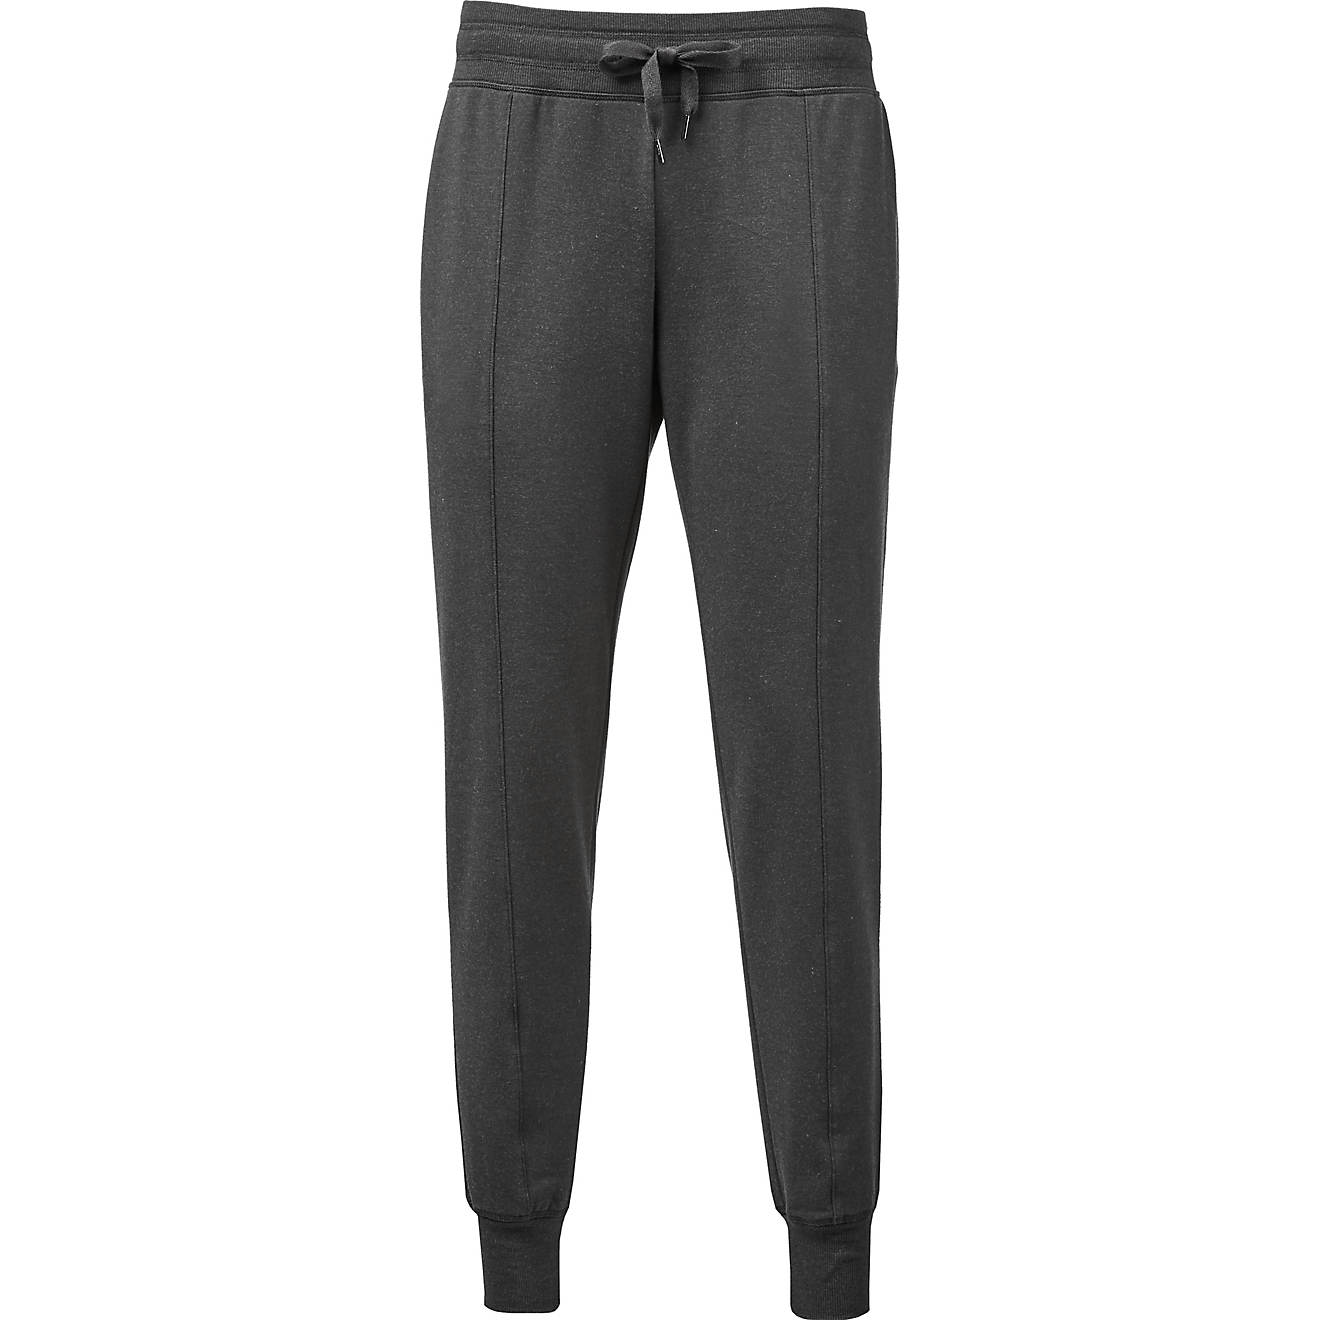 BCG Women's Lifestyle Cuffed Jogger Pants | Academy